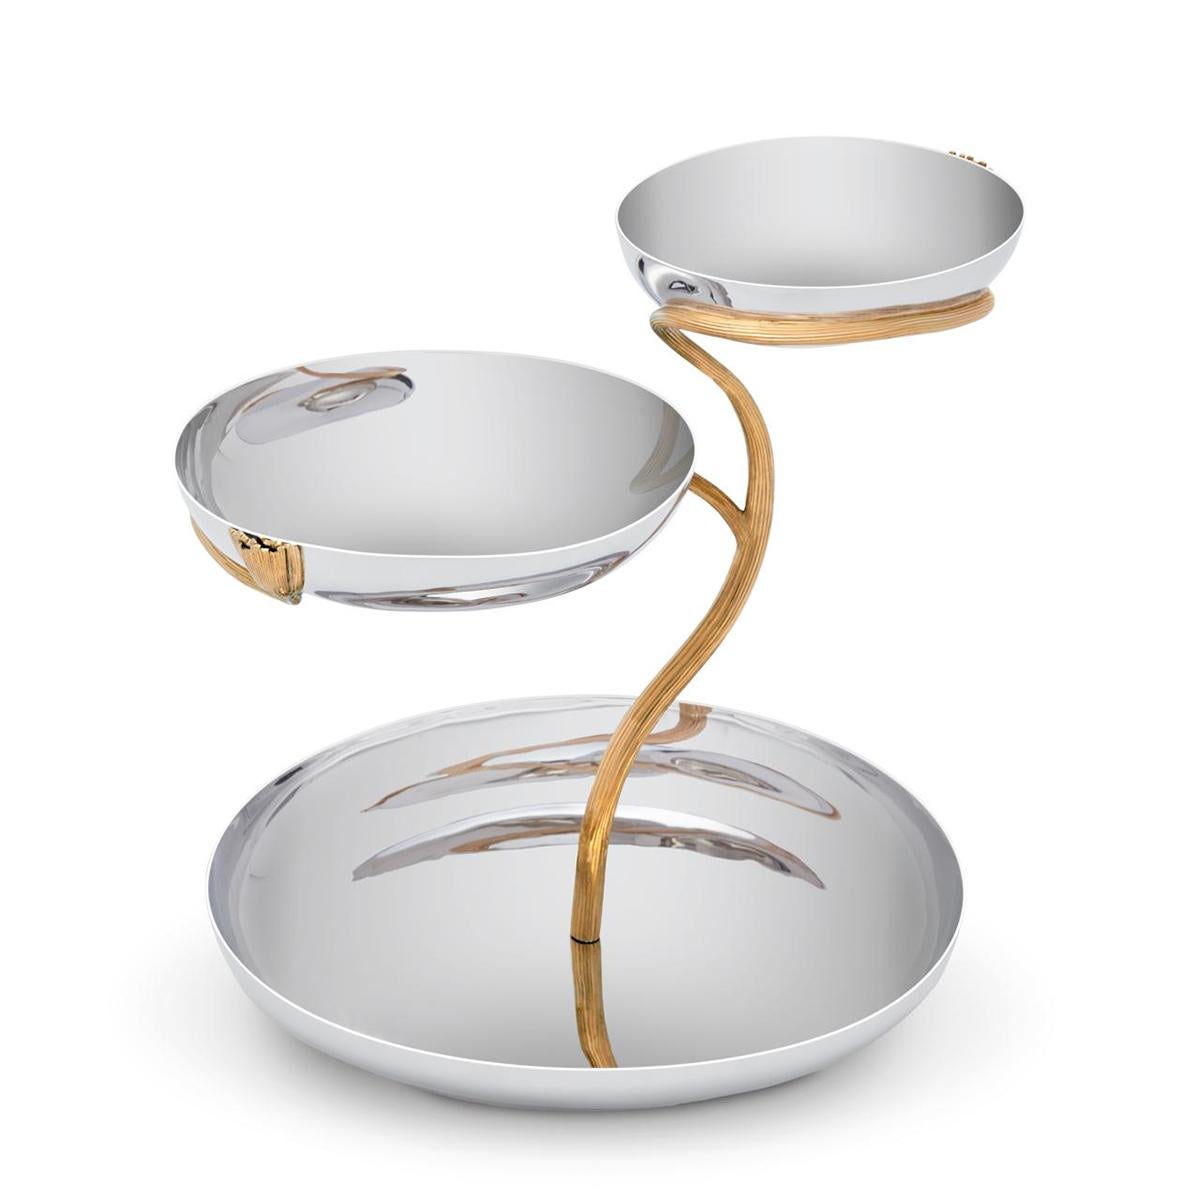 Cup gold stalk 3 large with 3 polished stainless steel
Bowls and with polished stainless steel 24-karat gold
Plated stalk.